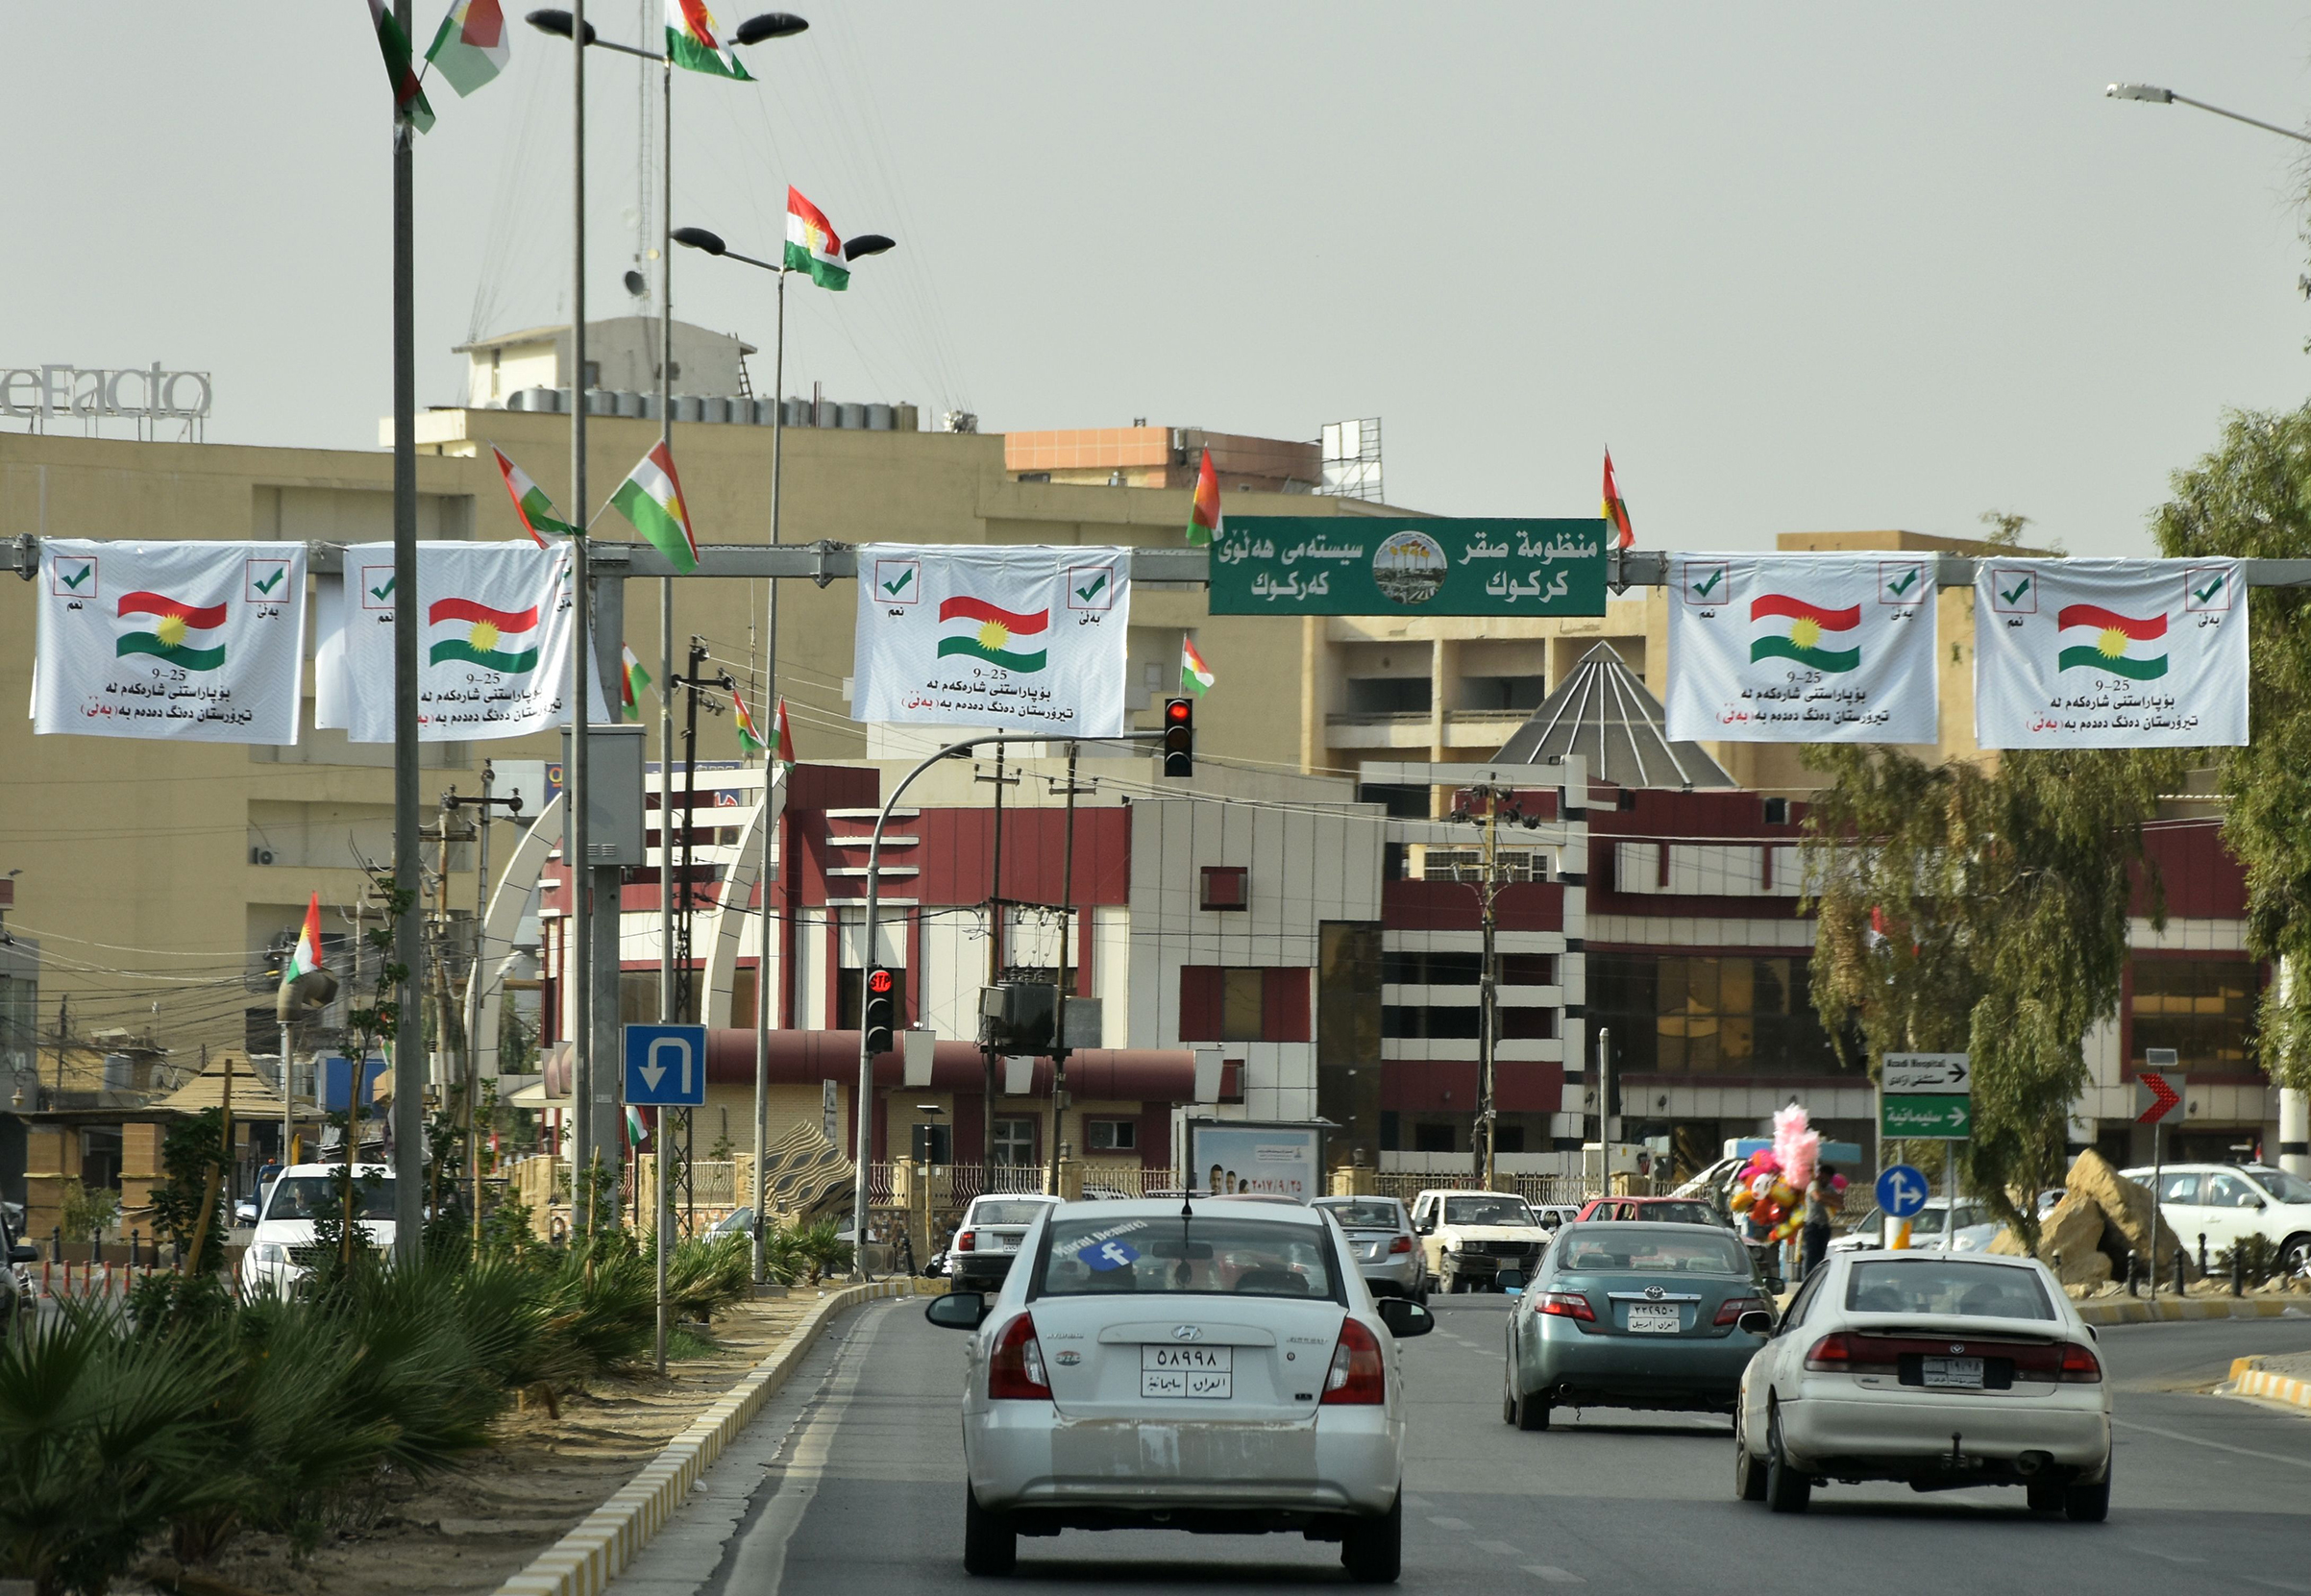 Posters encouraging people to vote in the upcoming independence referendum are seen in central Kirkuk on Sept. 21, 2017. (Marwan Ibrahim—AFP/Getty Images)